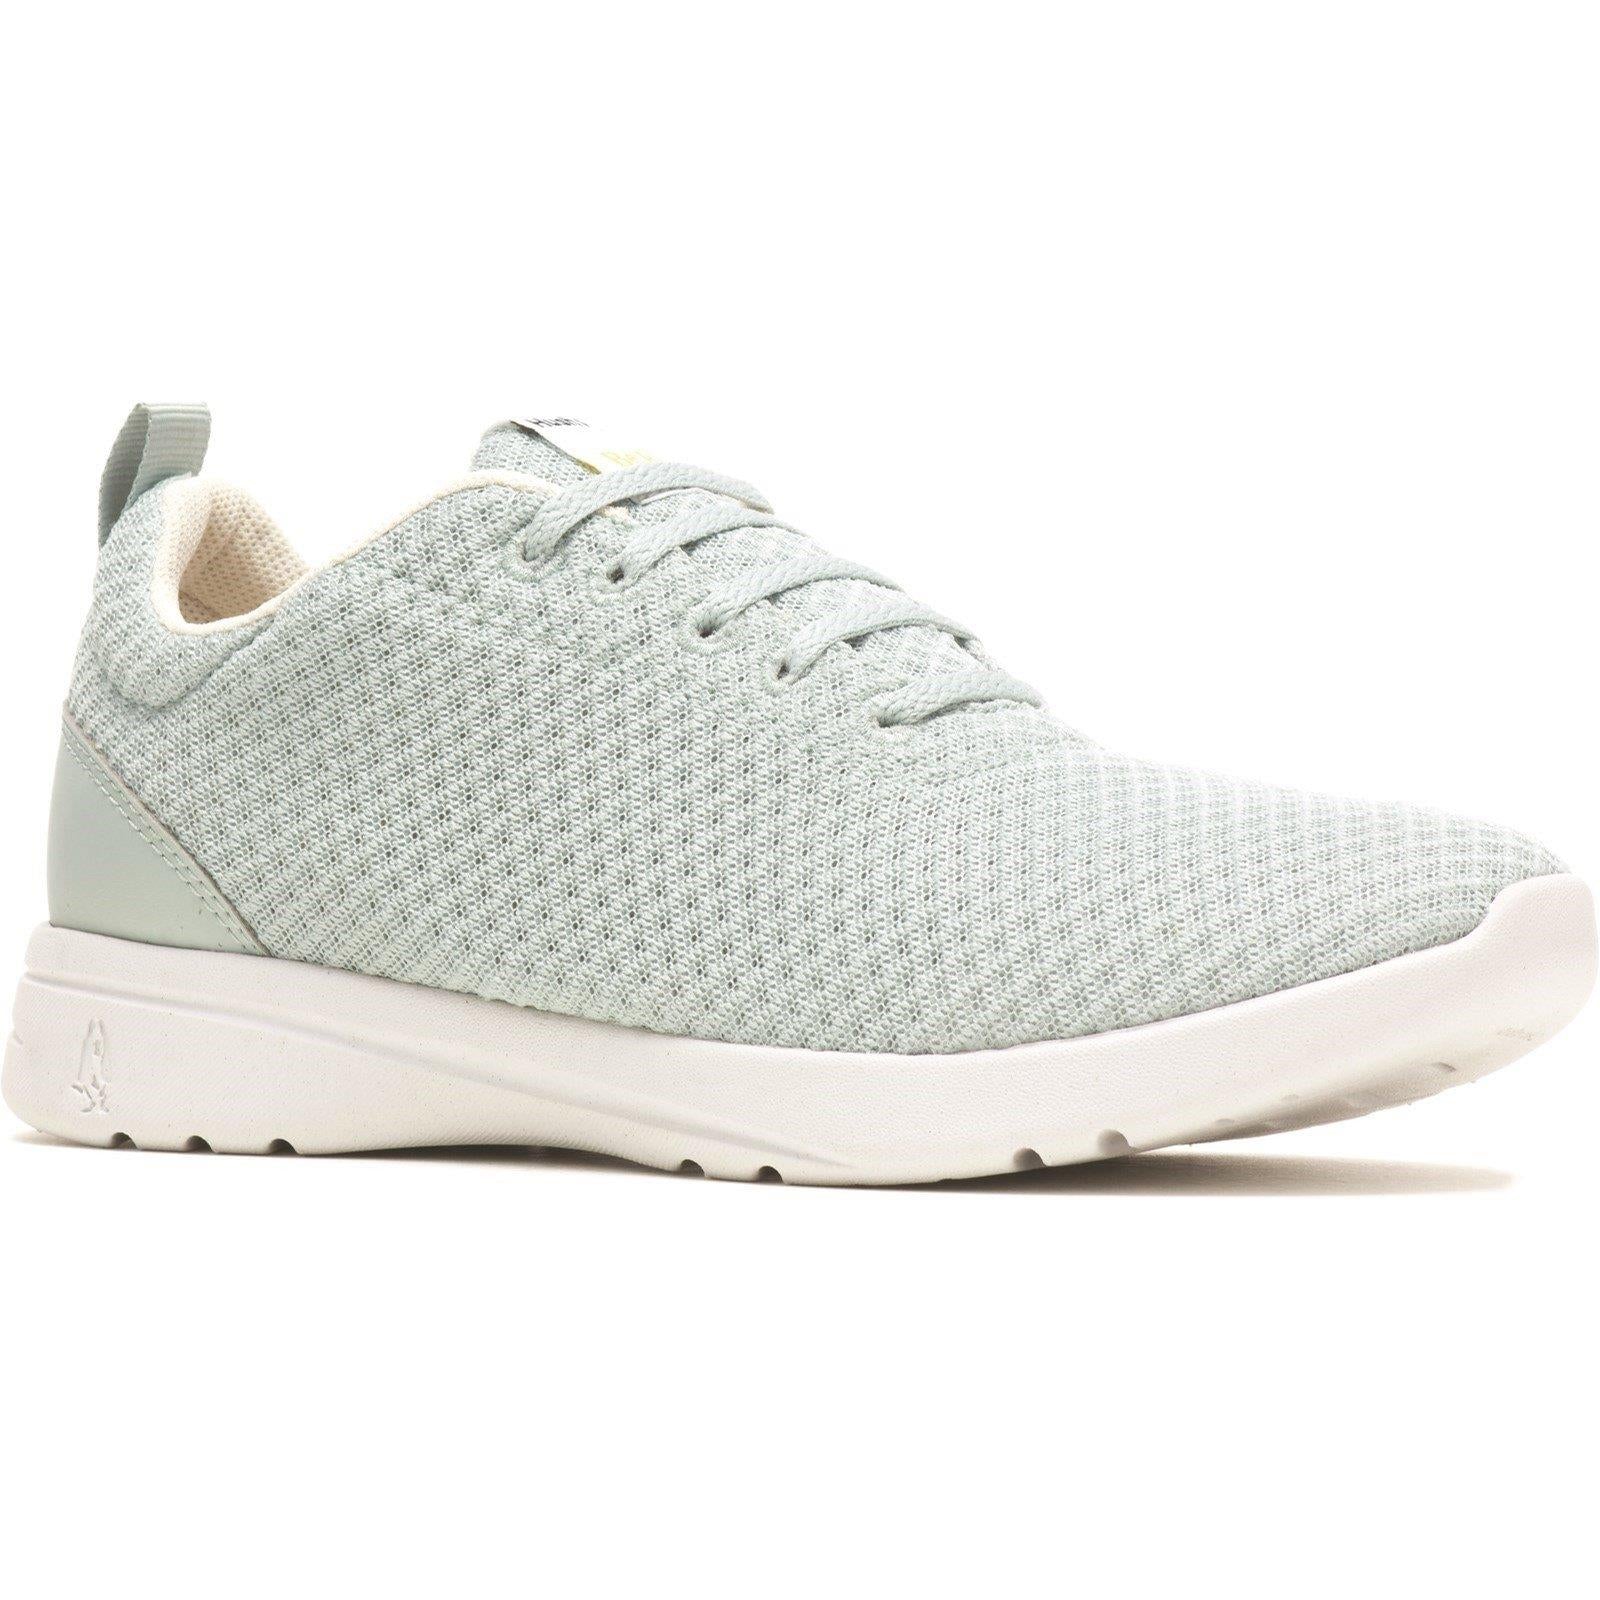 Hush Puppies Good recycled aqua lace-up women's trainer shoe